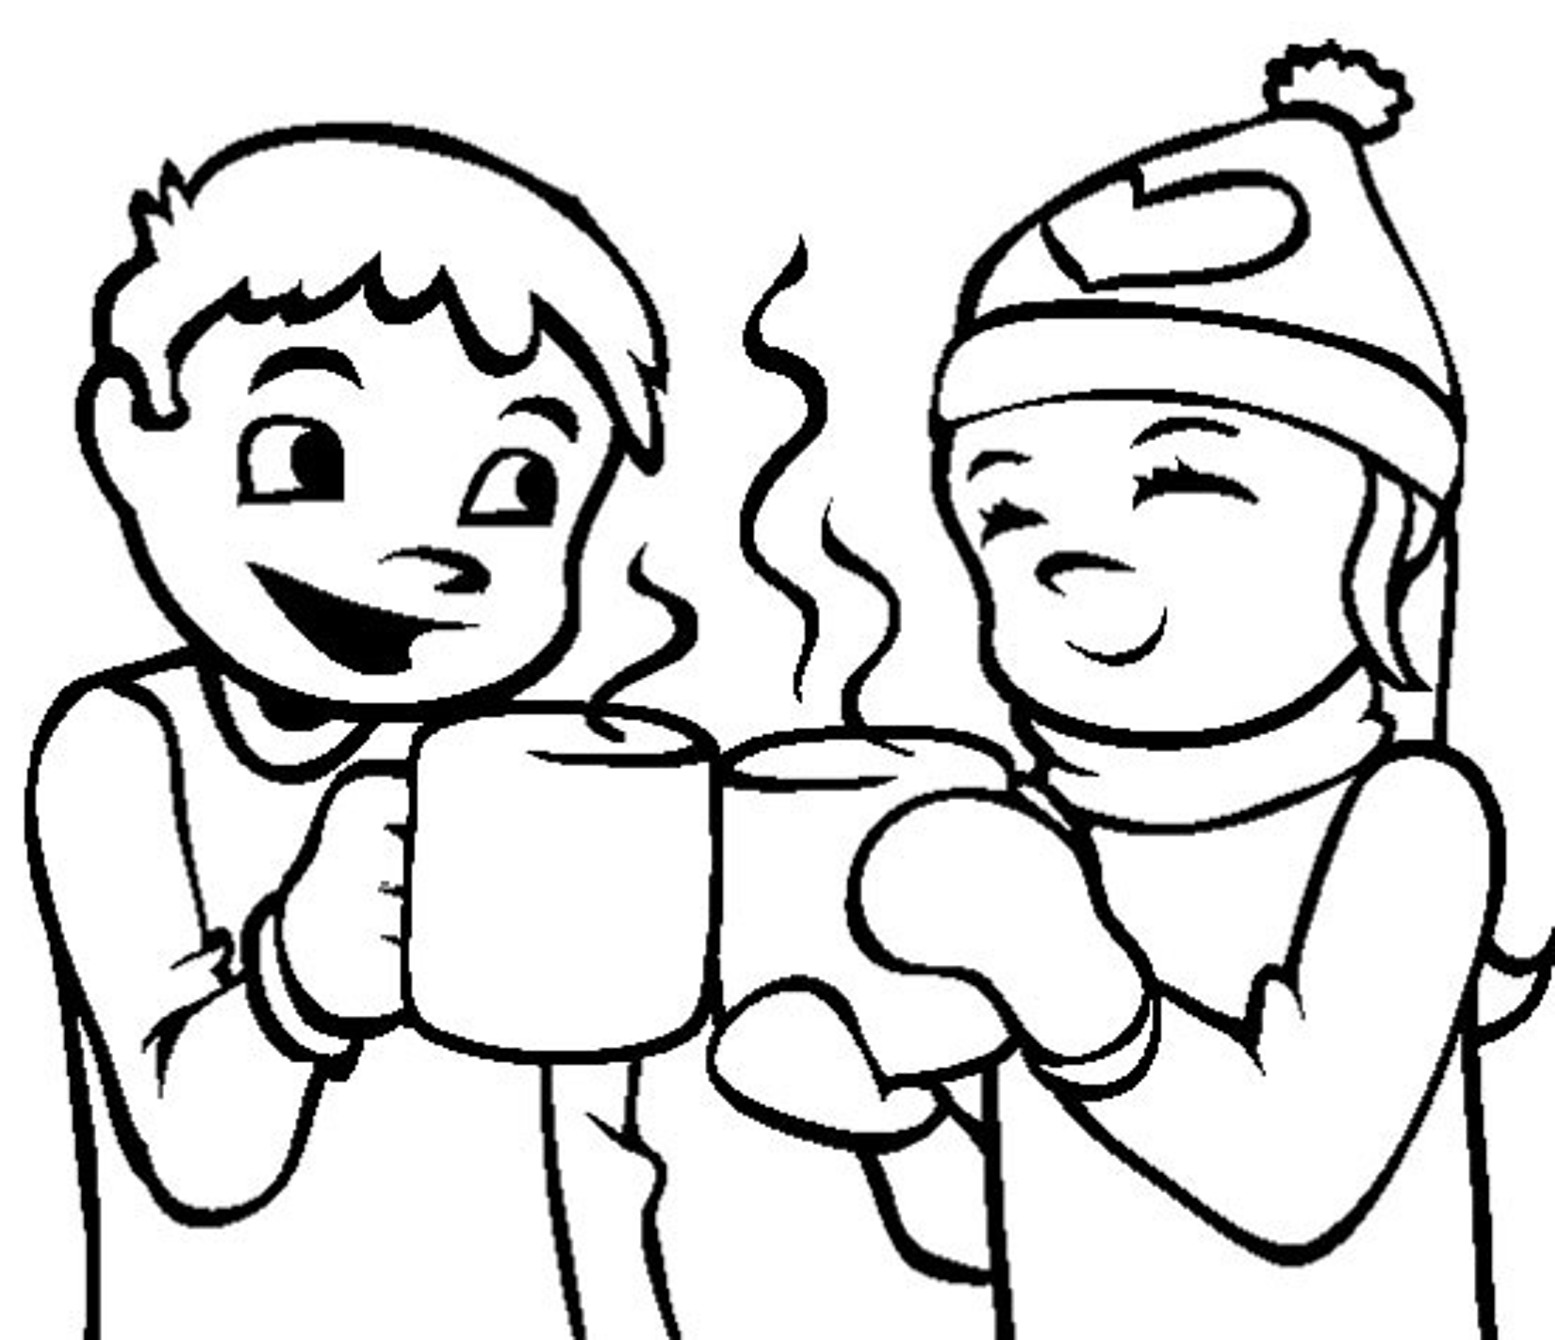 Kids Drinking Hot Cocoa Coloring Page